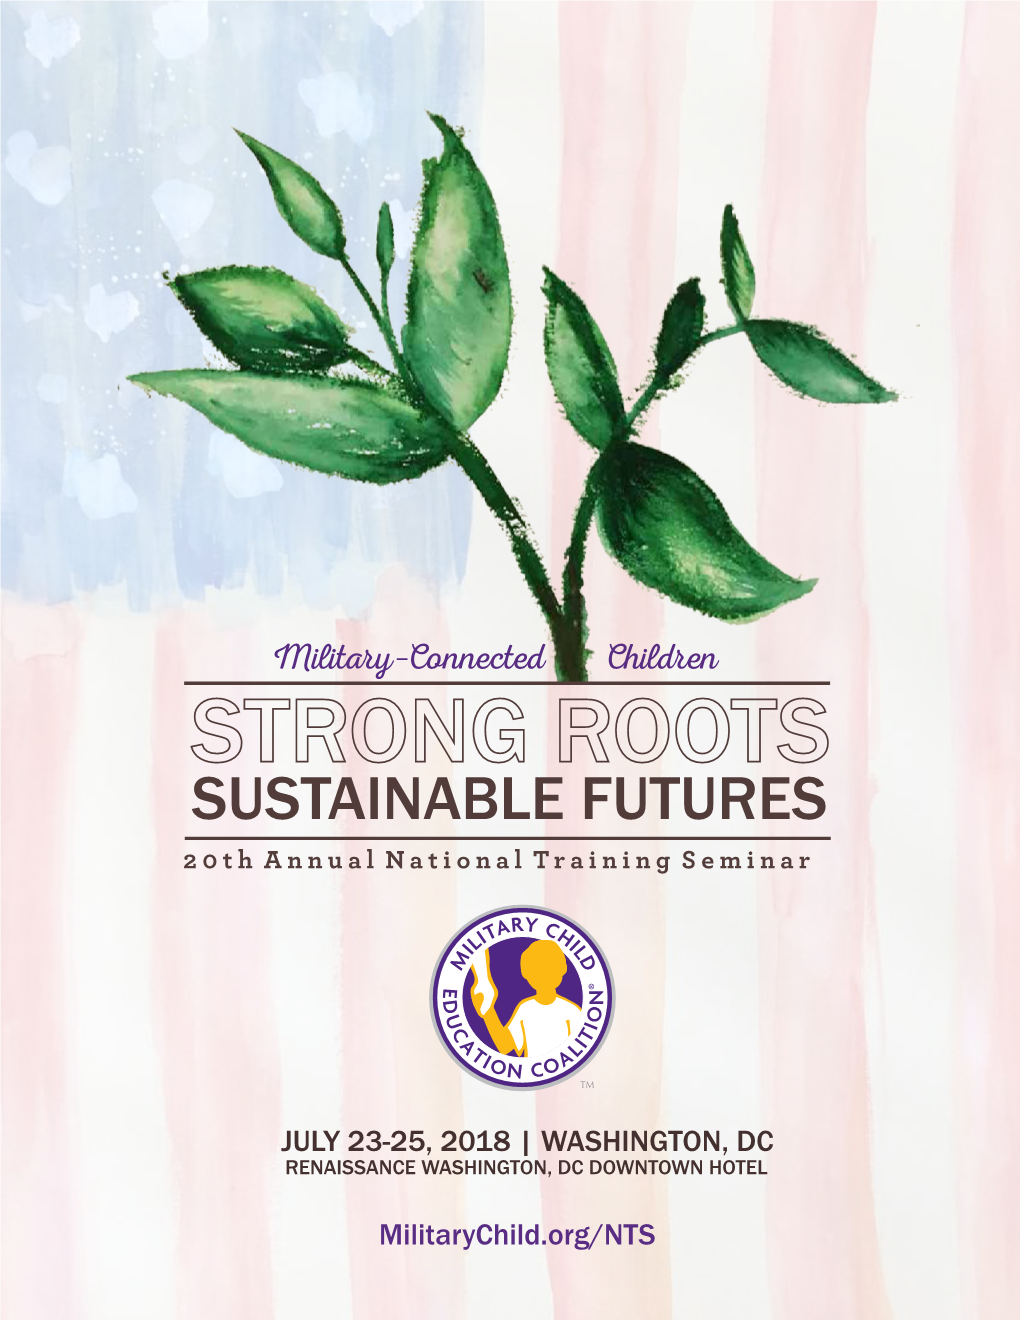 SUSTAINABLE FUTURES 20Th Annual National Training Seminar